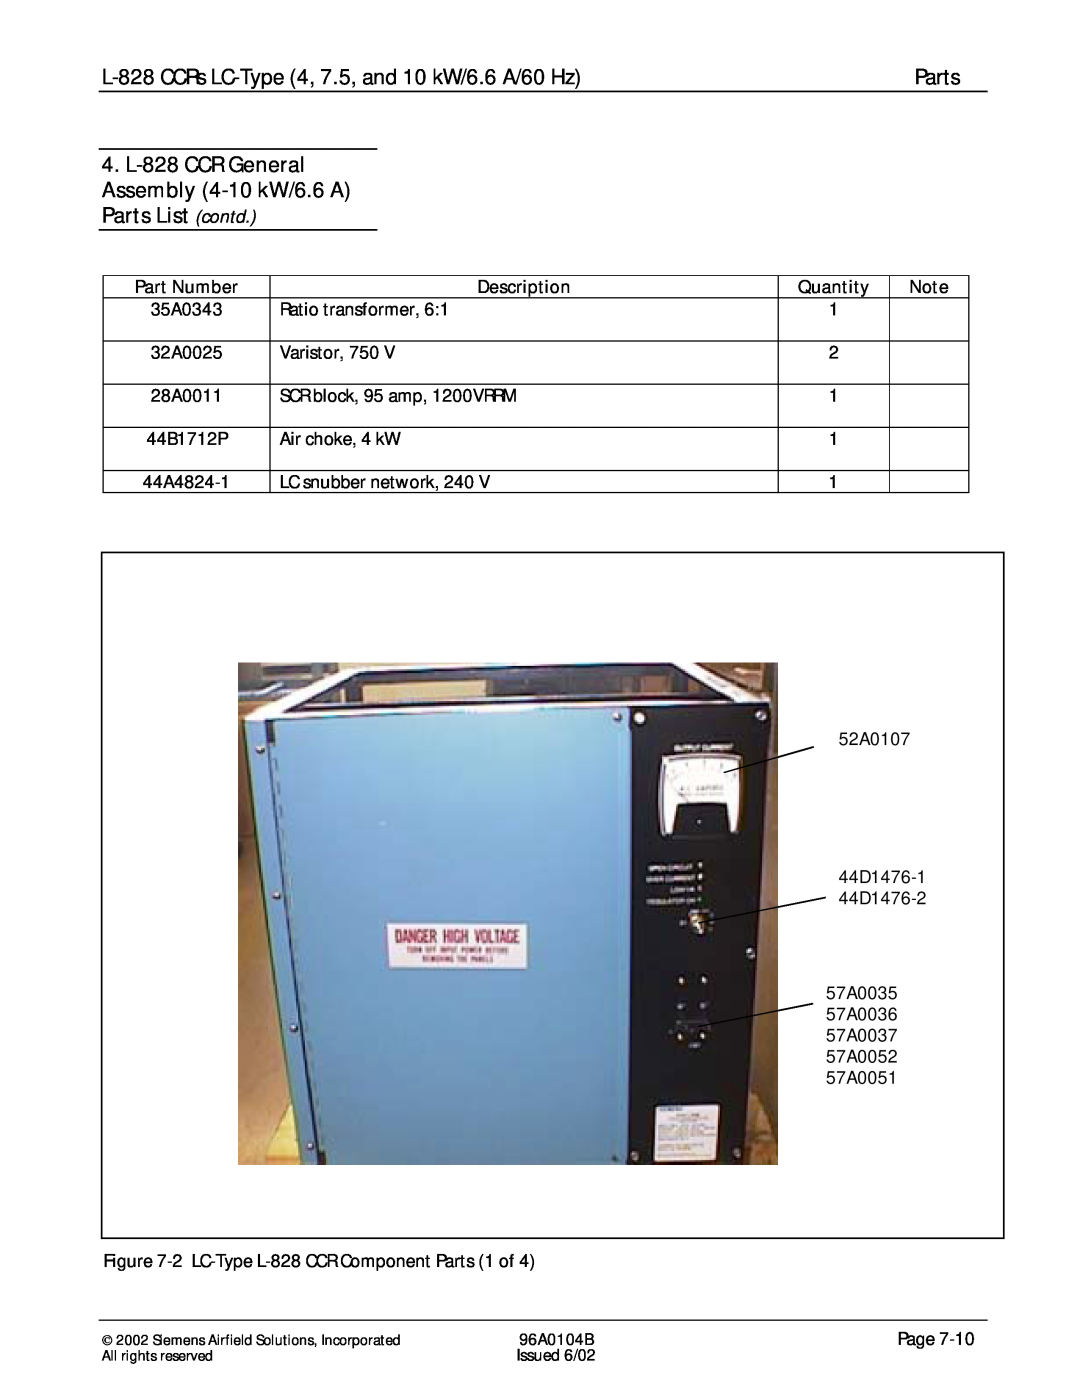 Siemens manual L-828CCRs LC-Type4, 7.5, and 10 kW/6.6 A/60 Hz, Parts, 35A0343 